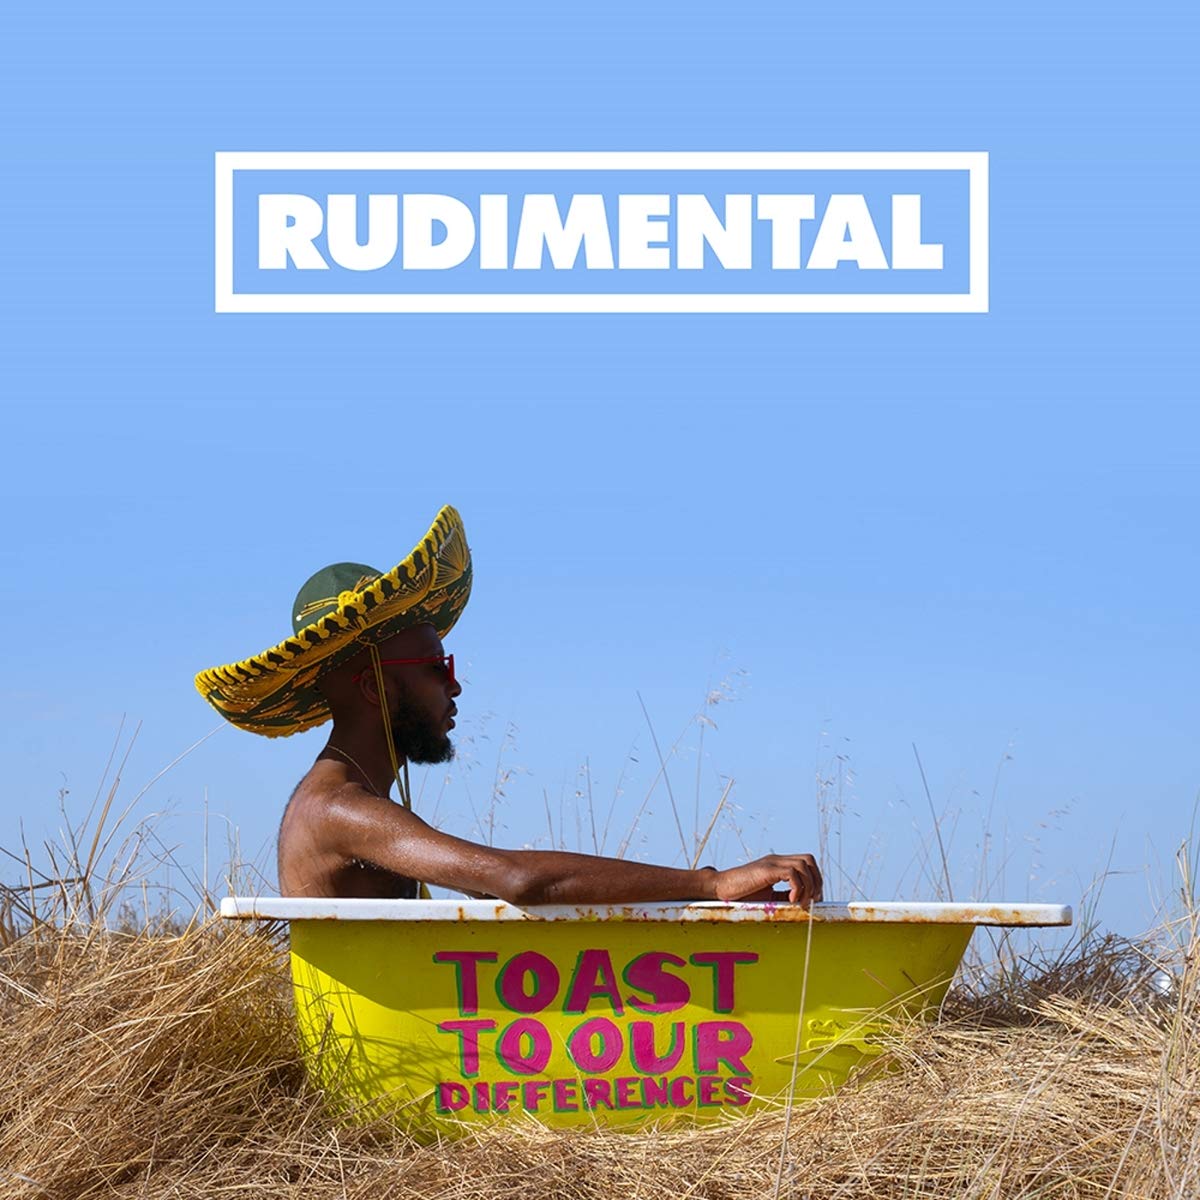 Rudimental - Toast to our Differences (Deluxe Edition) (2019) [FLAC 24bit/44,1kHz]